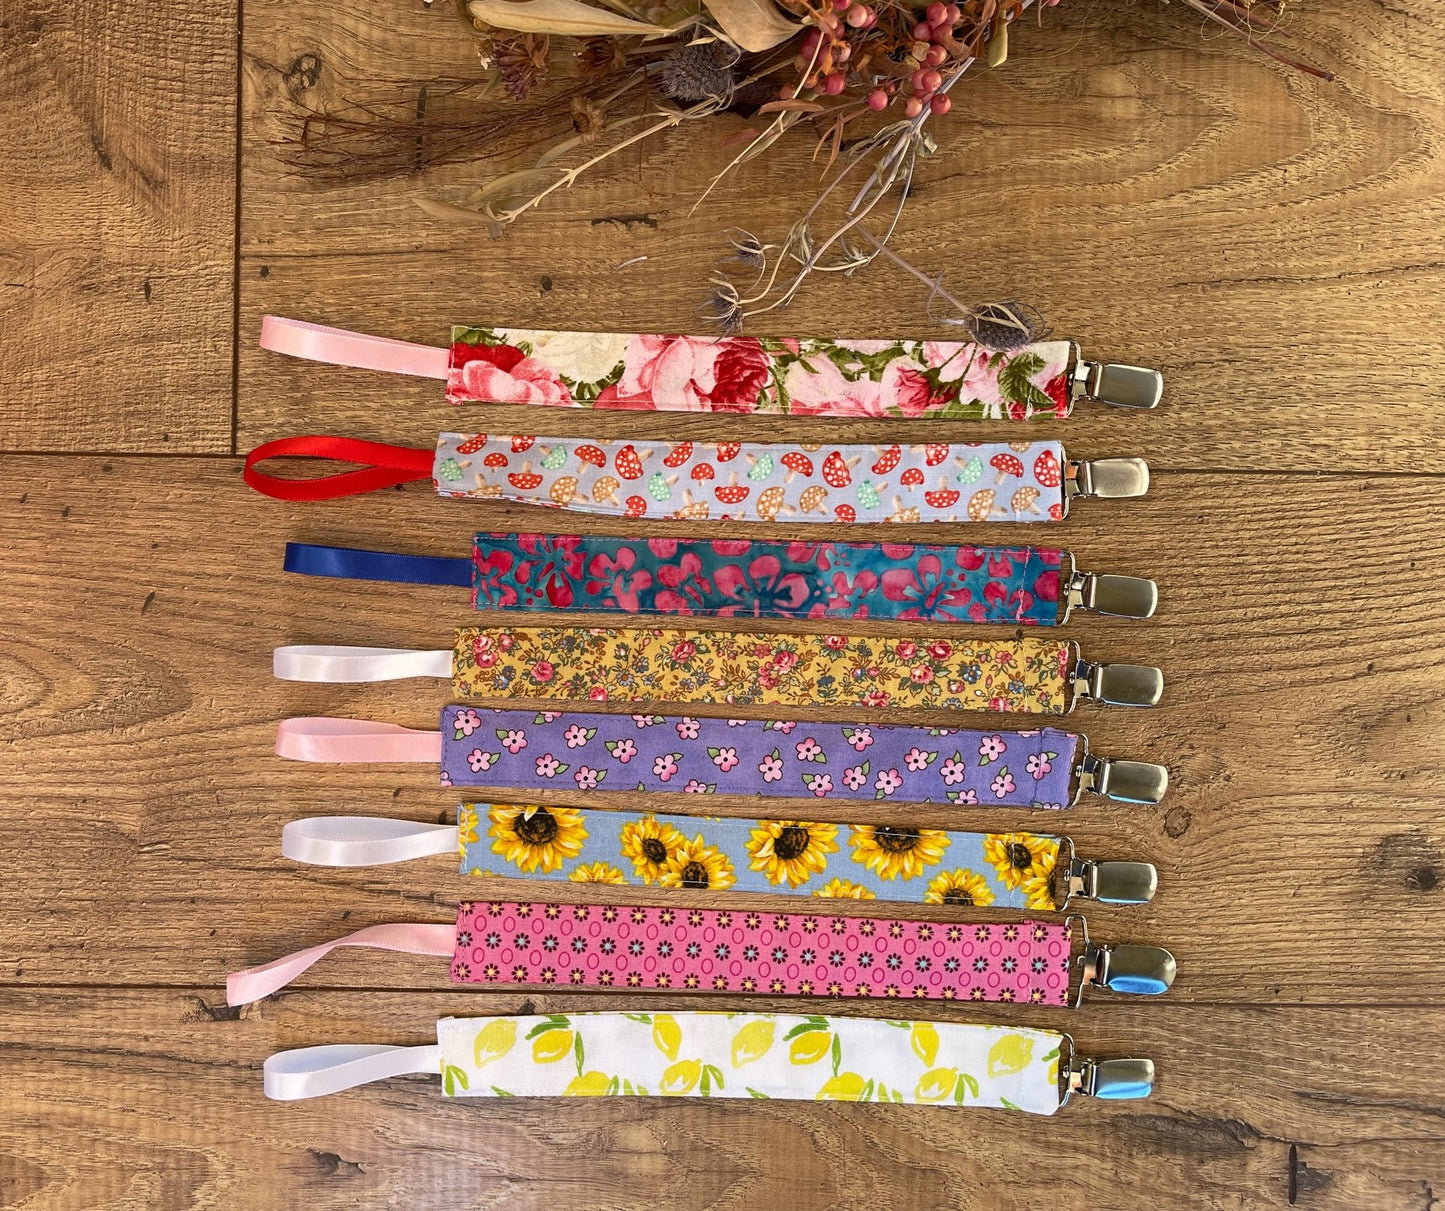 Floral Flowers Fabric Pacifier Clips Teether Toy Leash